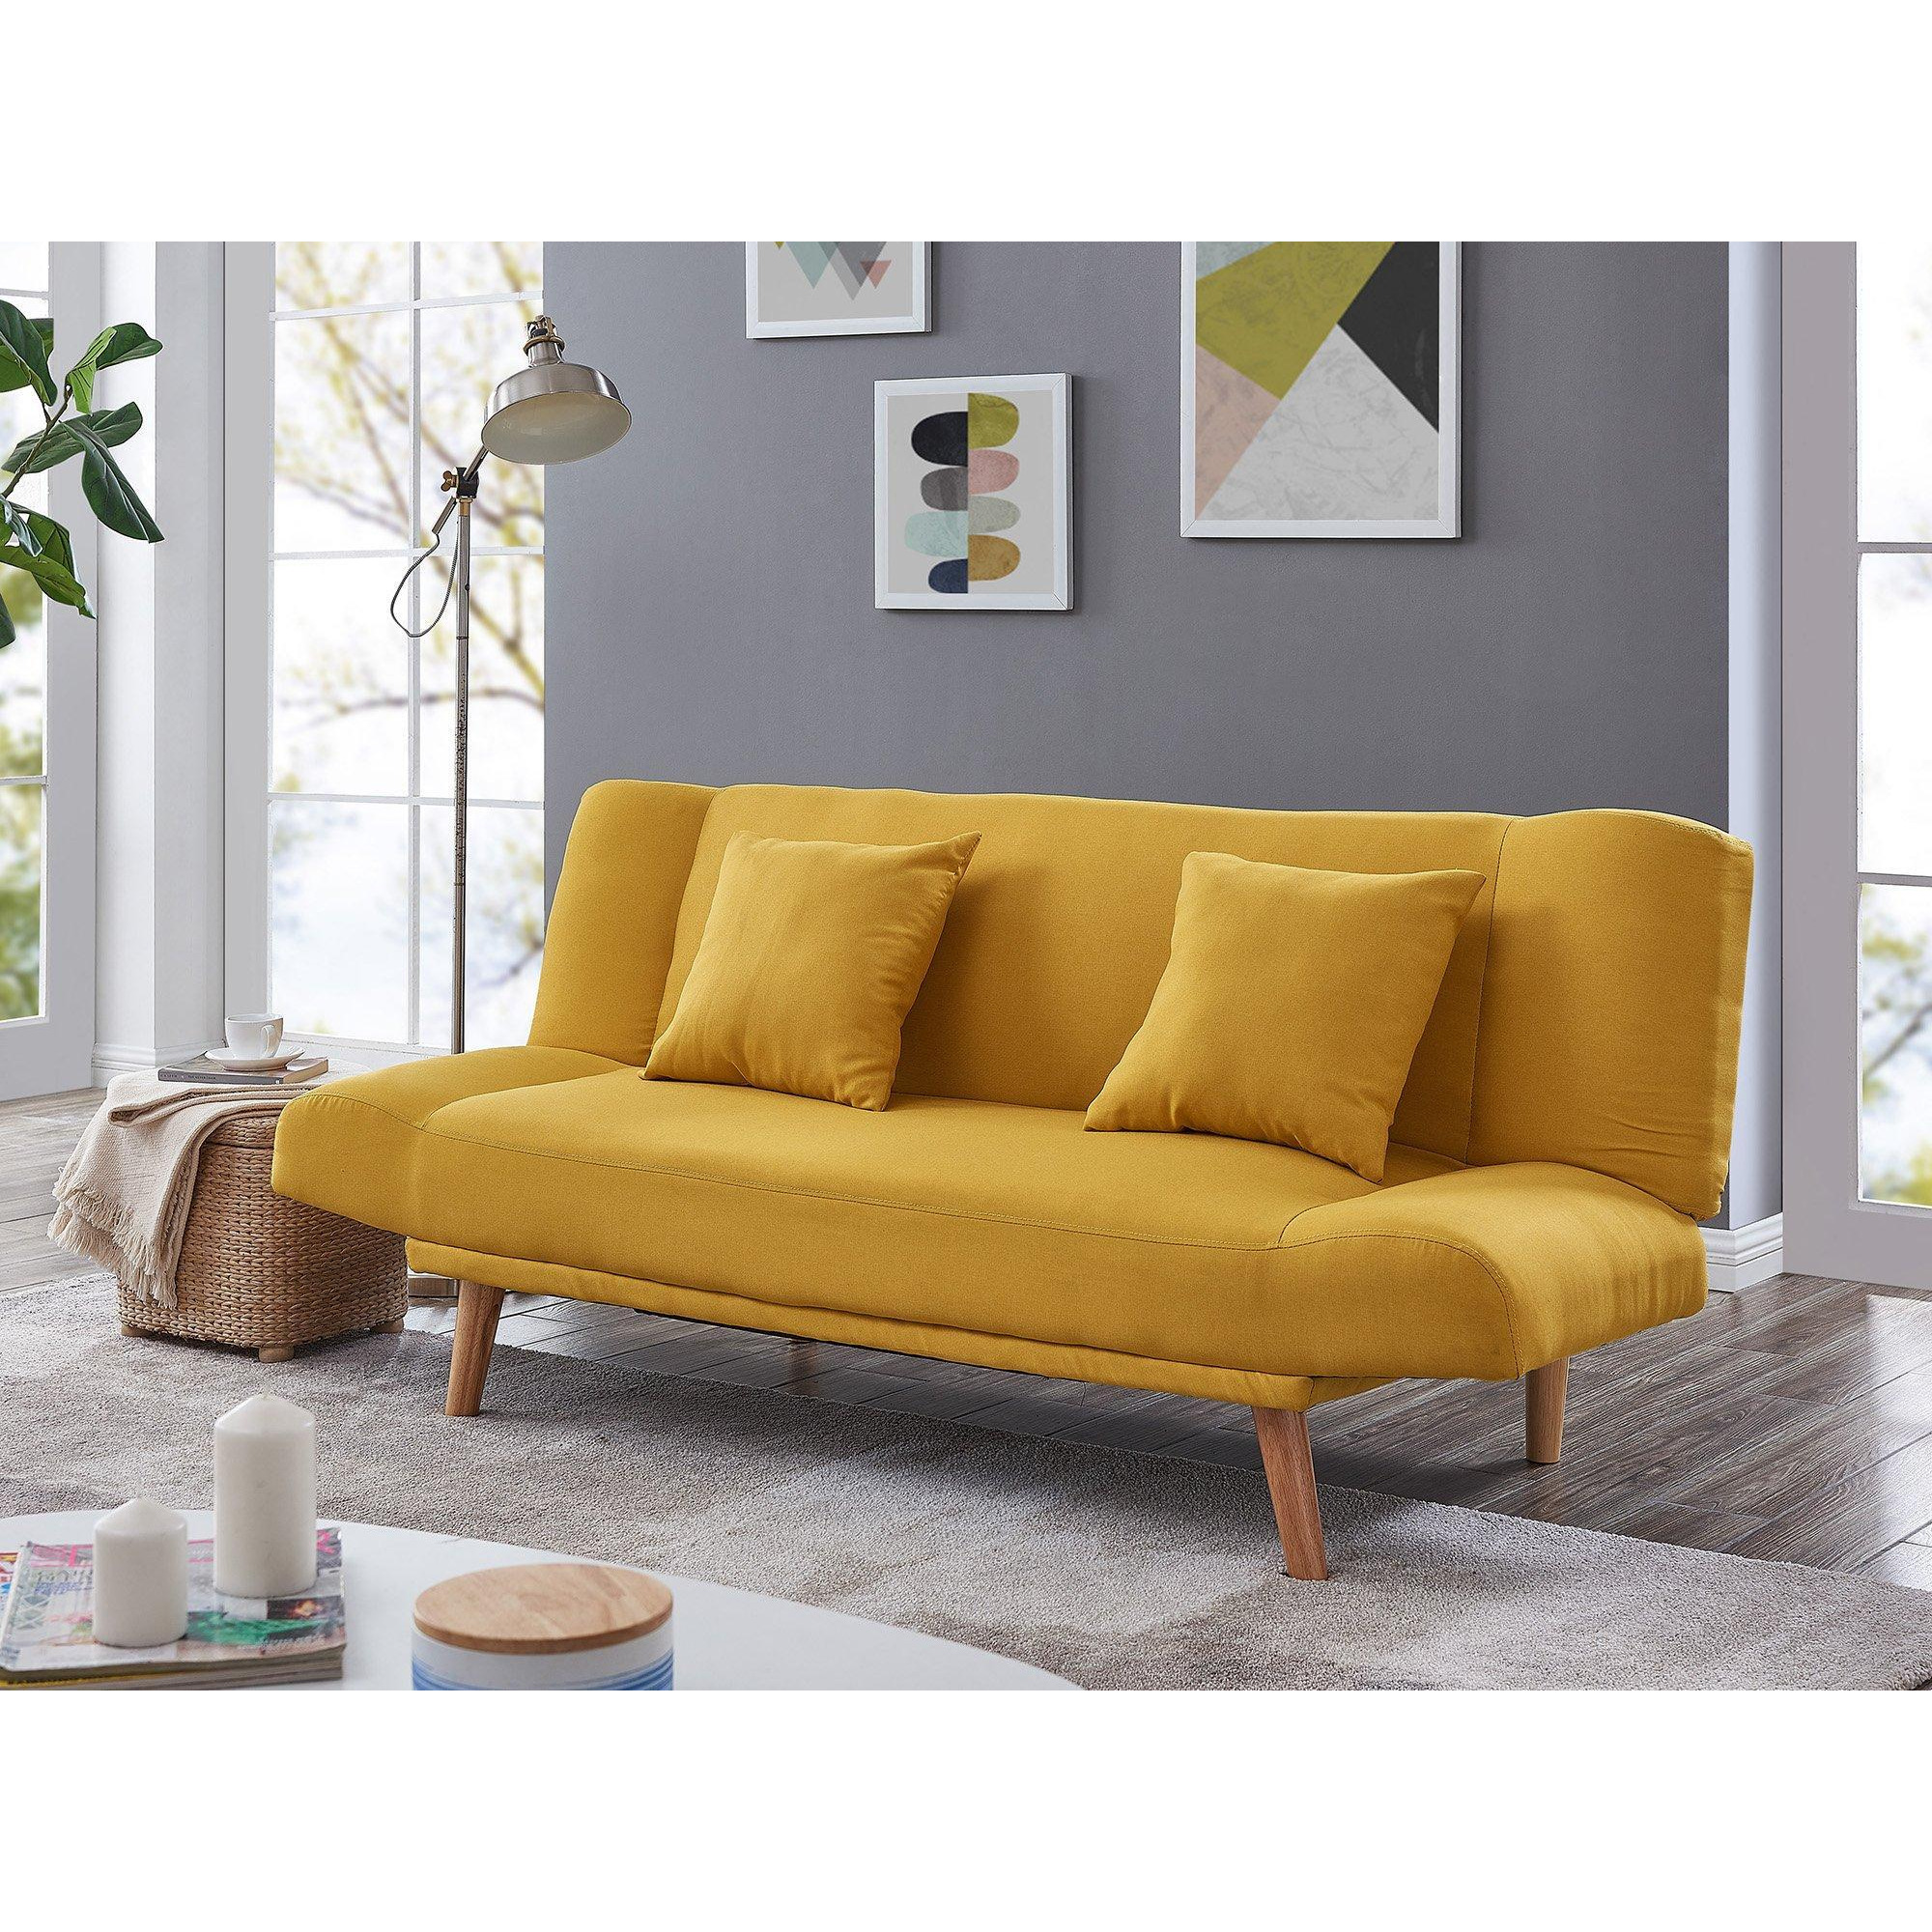 Hamilton Fabric Sofa Bed With Matching Scatter Cushions and Wooden Legs - image 1